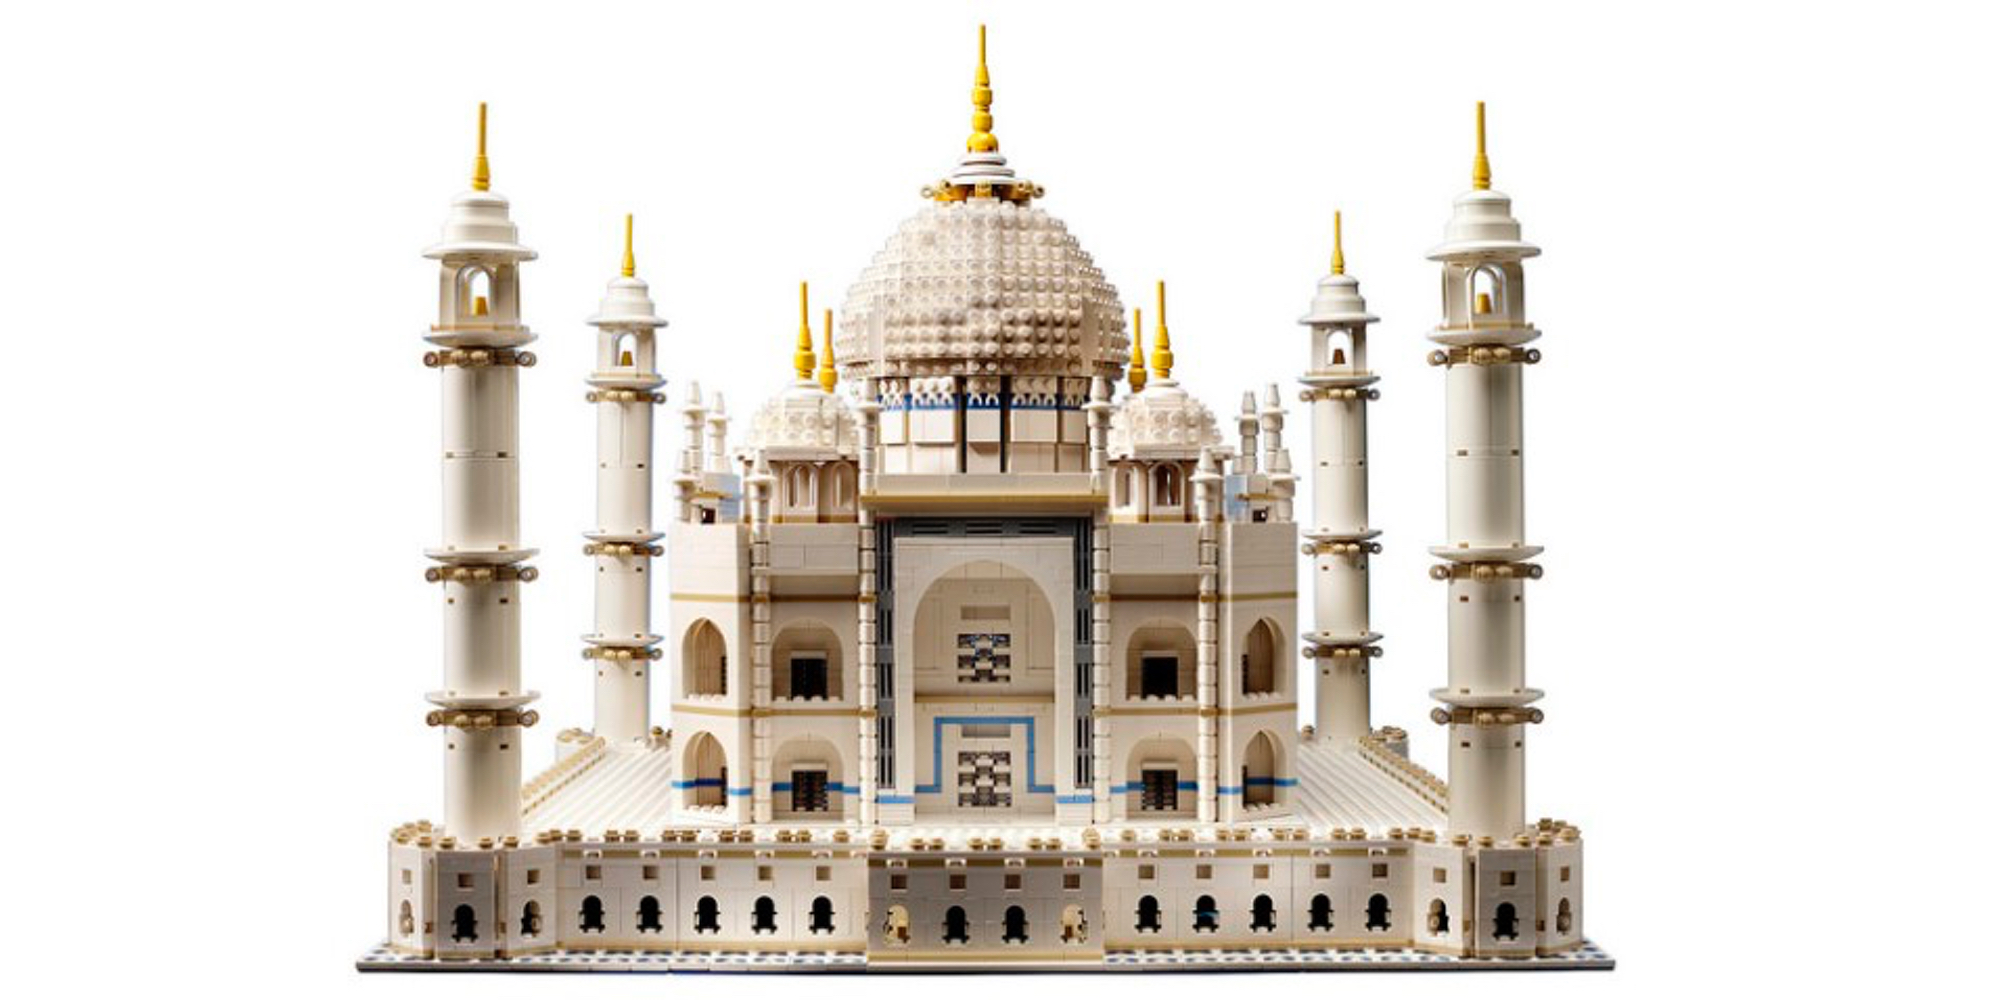 Lego 10189 Taj Mahal Model (Discontinued by manufacturer)